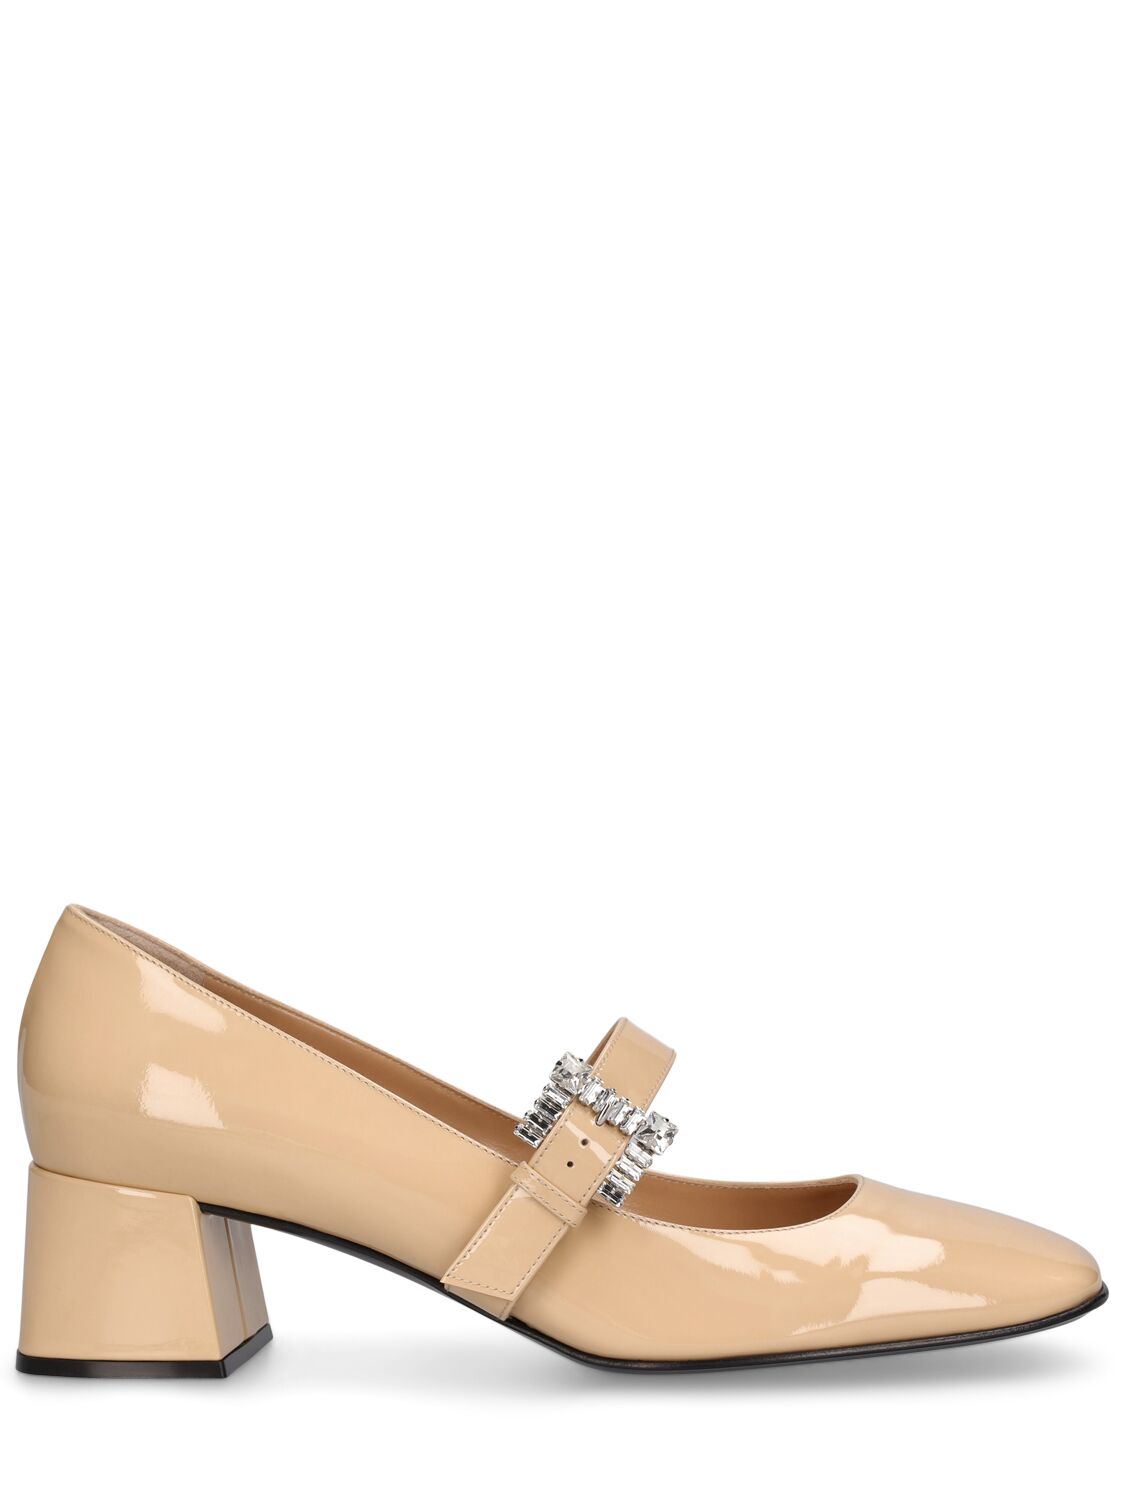 Sergio Rossi 45mm Patent Leather Pumps In Nude